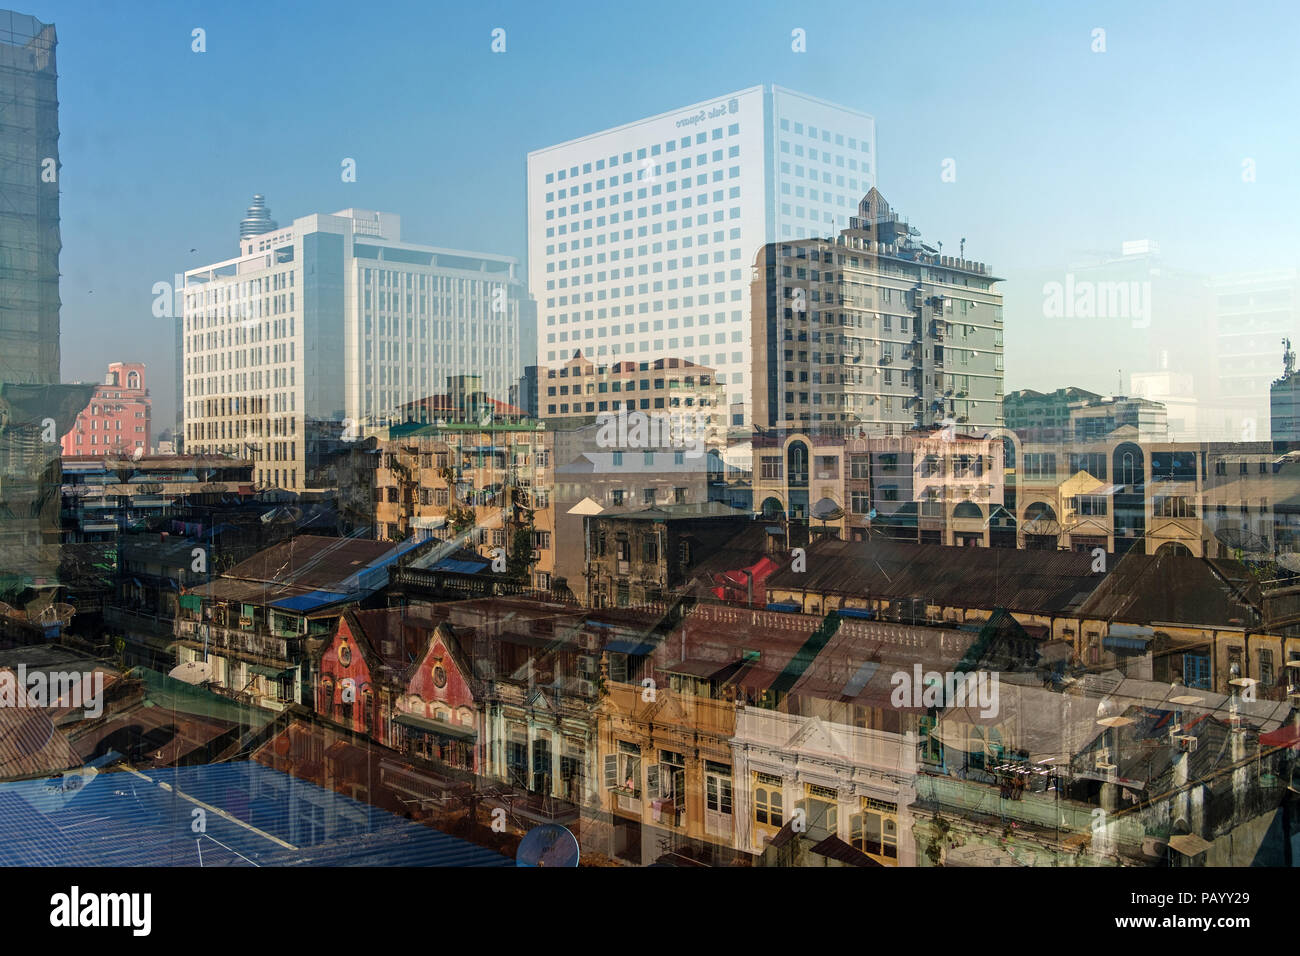 A reflection in a window of the new and colonial builidings in the Downtown of Yangon, Myanmar. Stock Photo